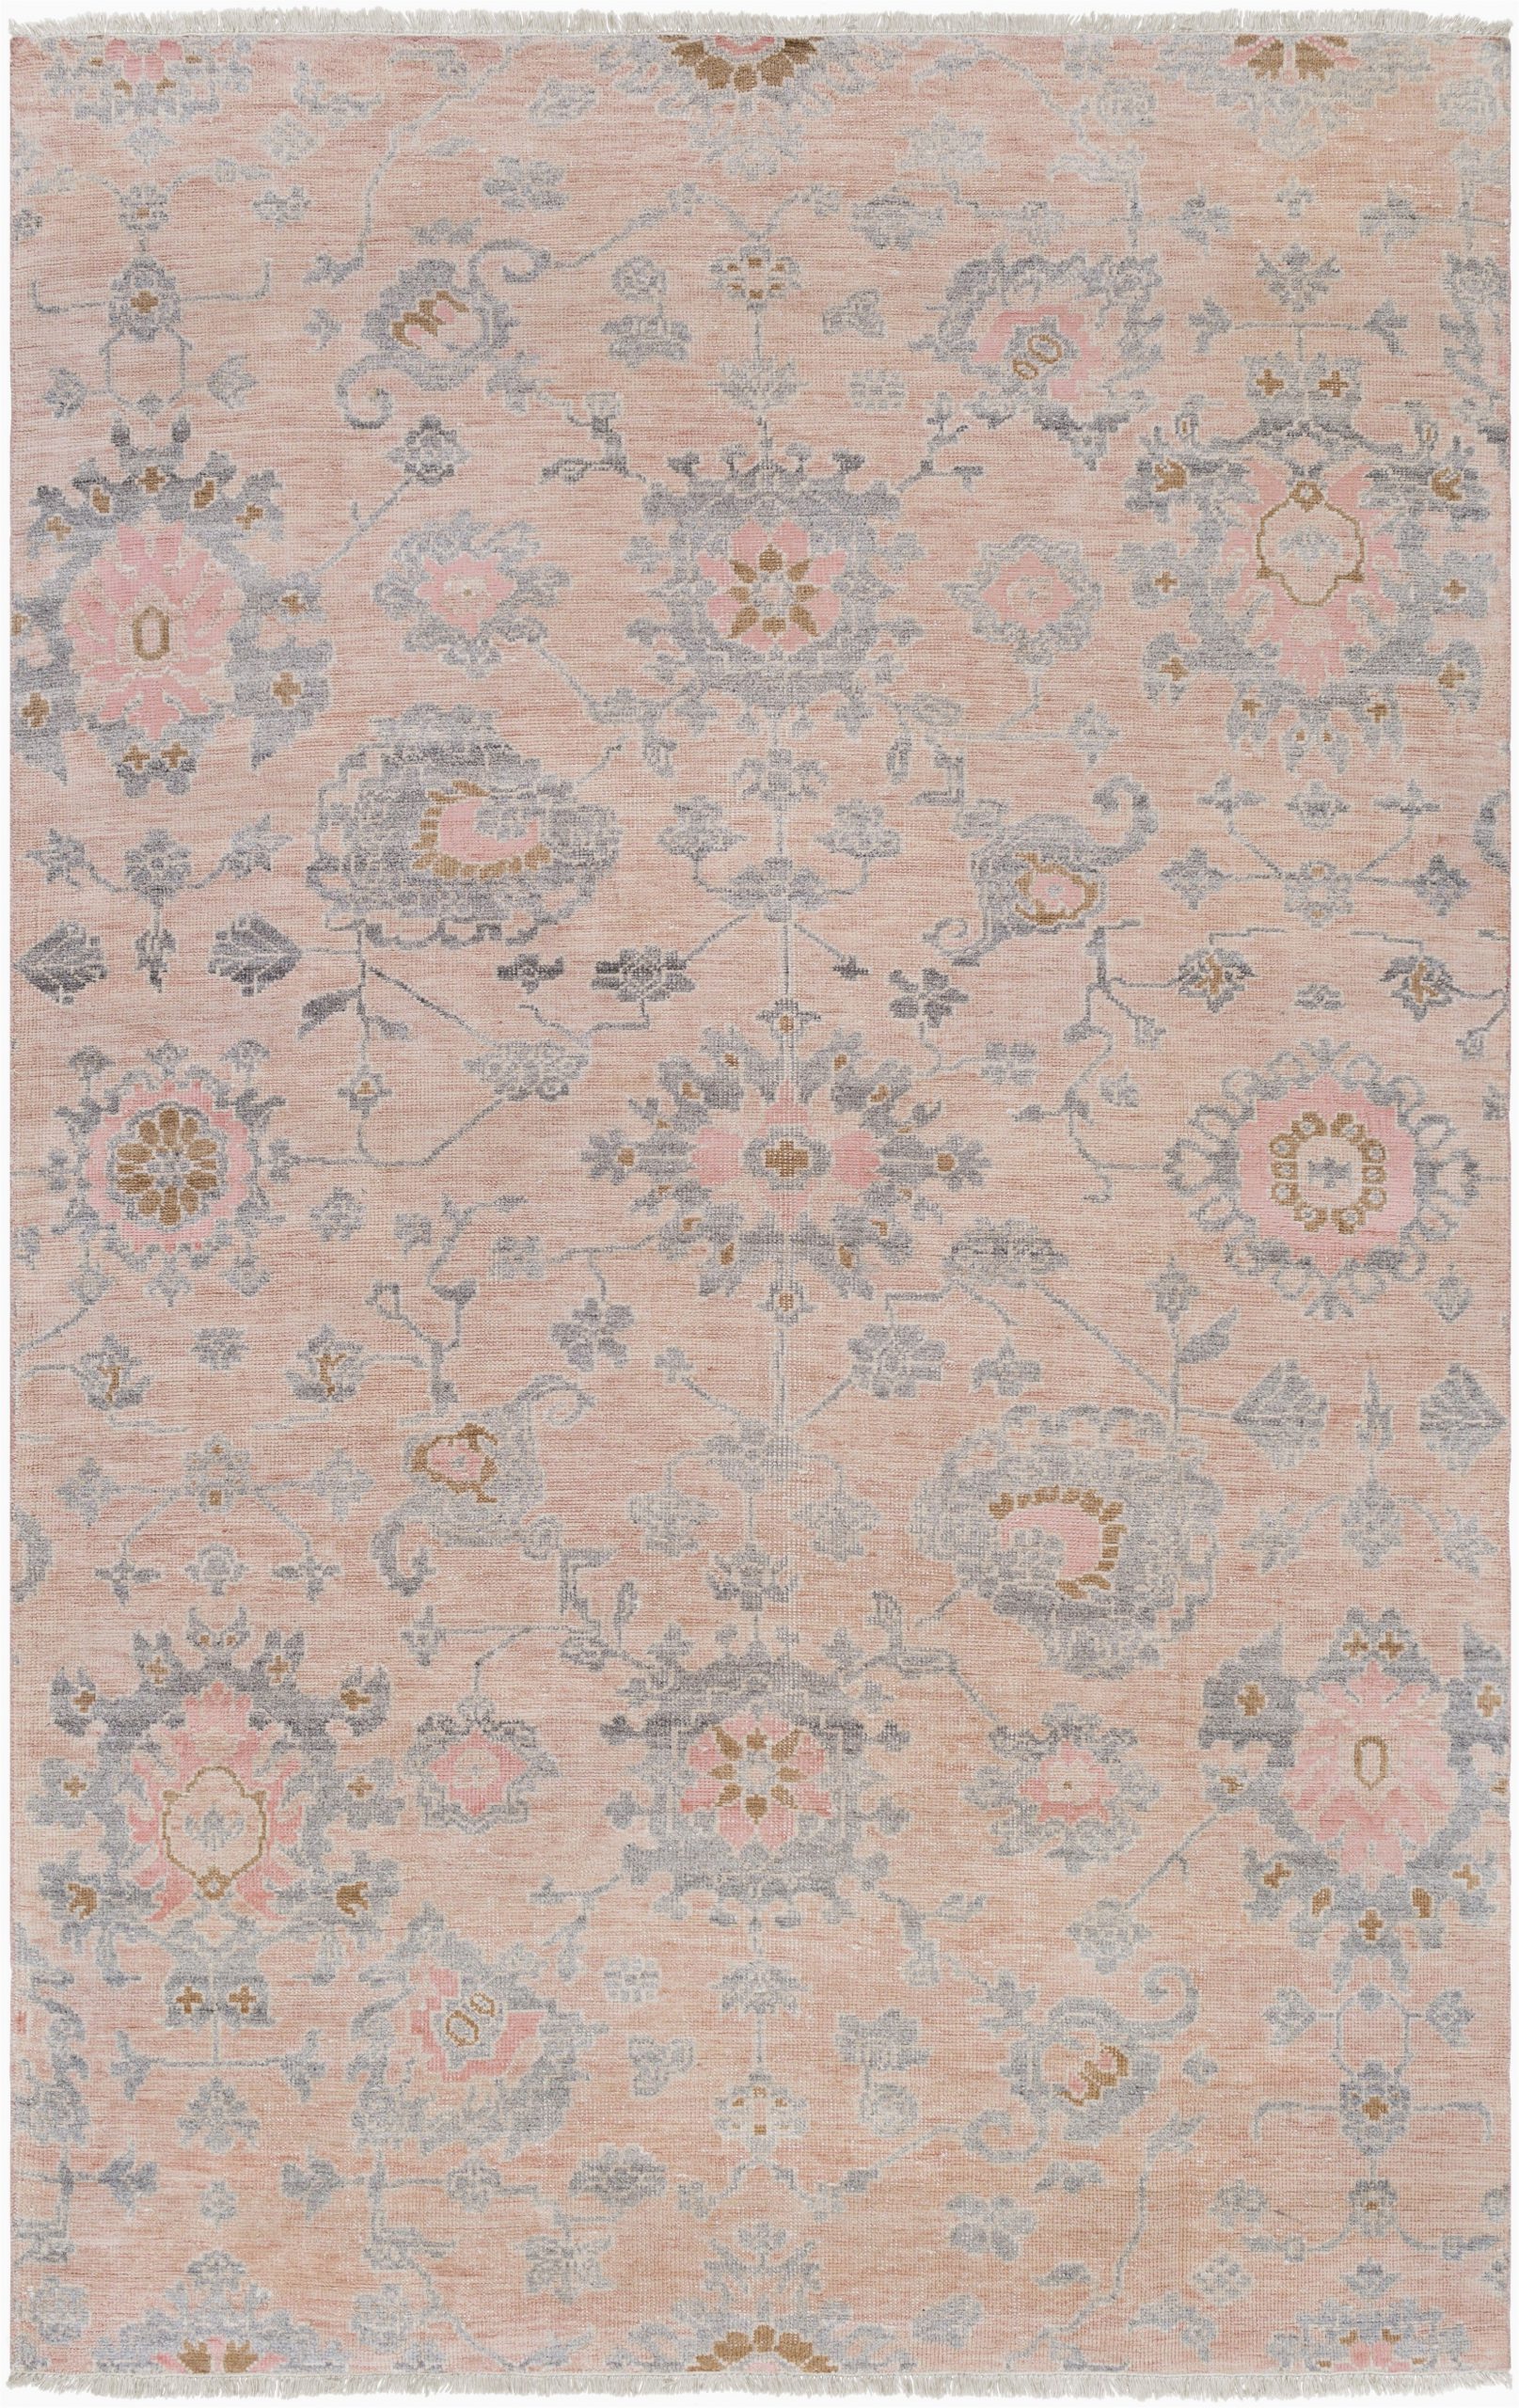 Grey and Peach area Rug norra Rug with An Antiqued Finish and Fringed Ends This